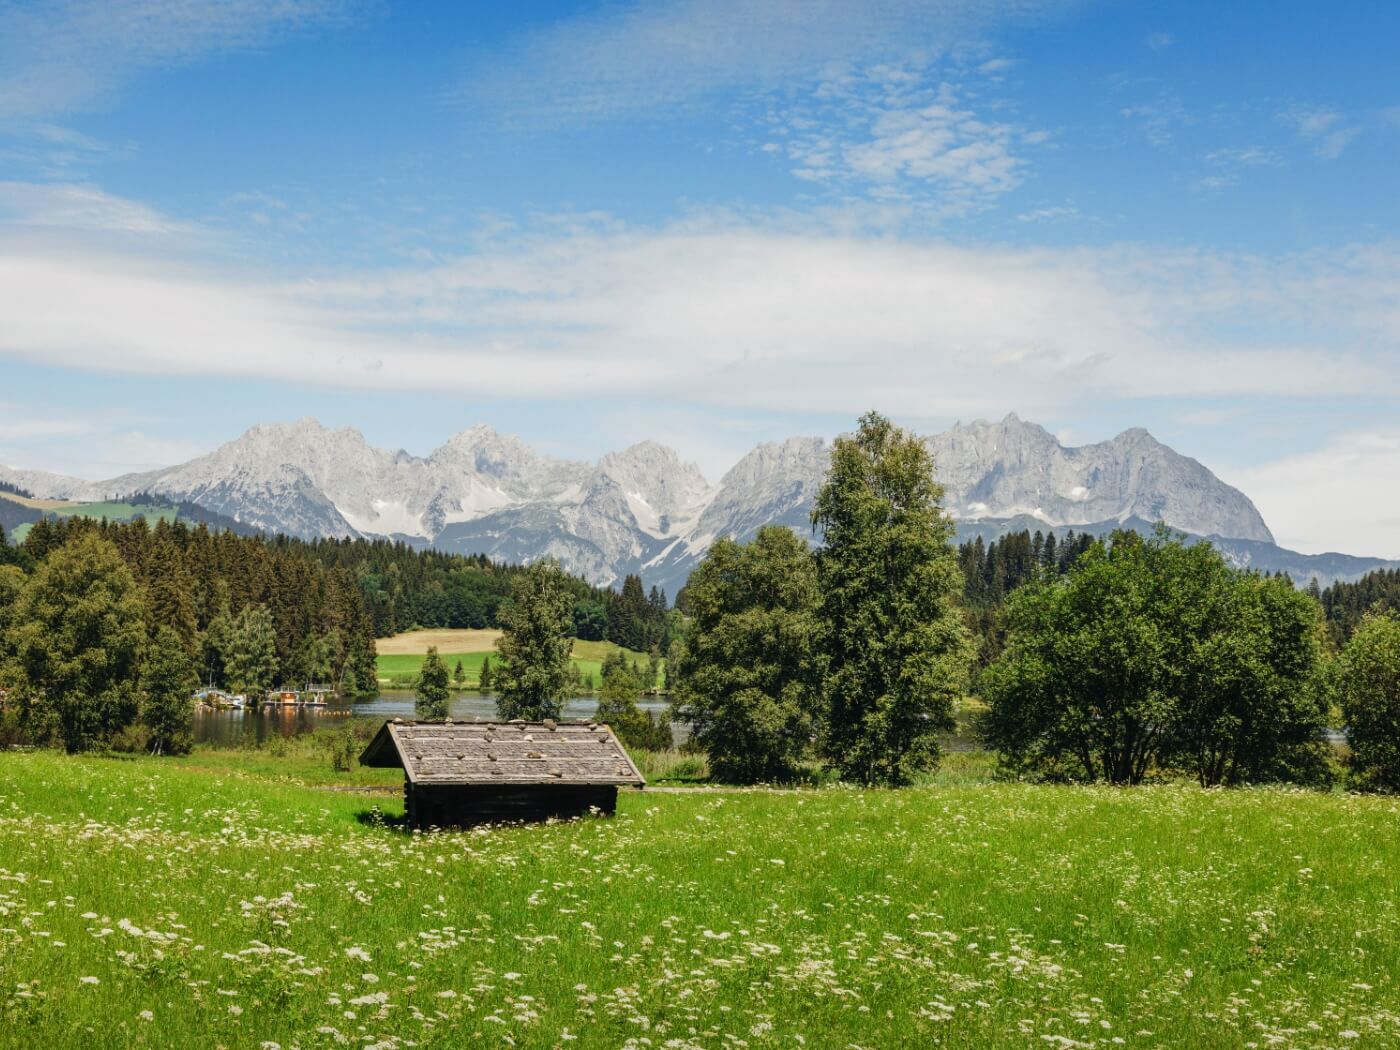 A summery mountain meadow with mountains in the background near the luxury hotel Kitzbühel